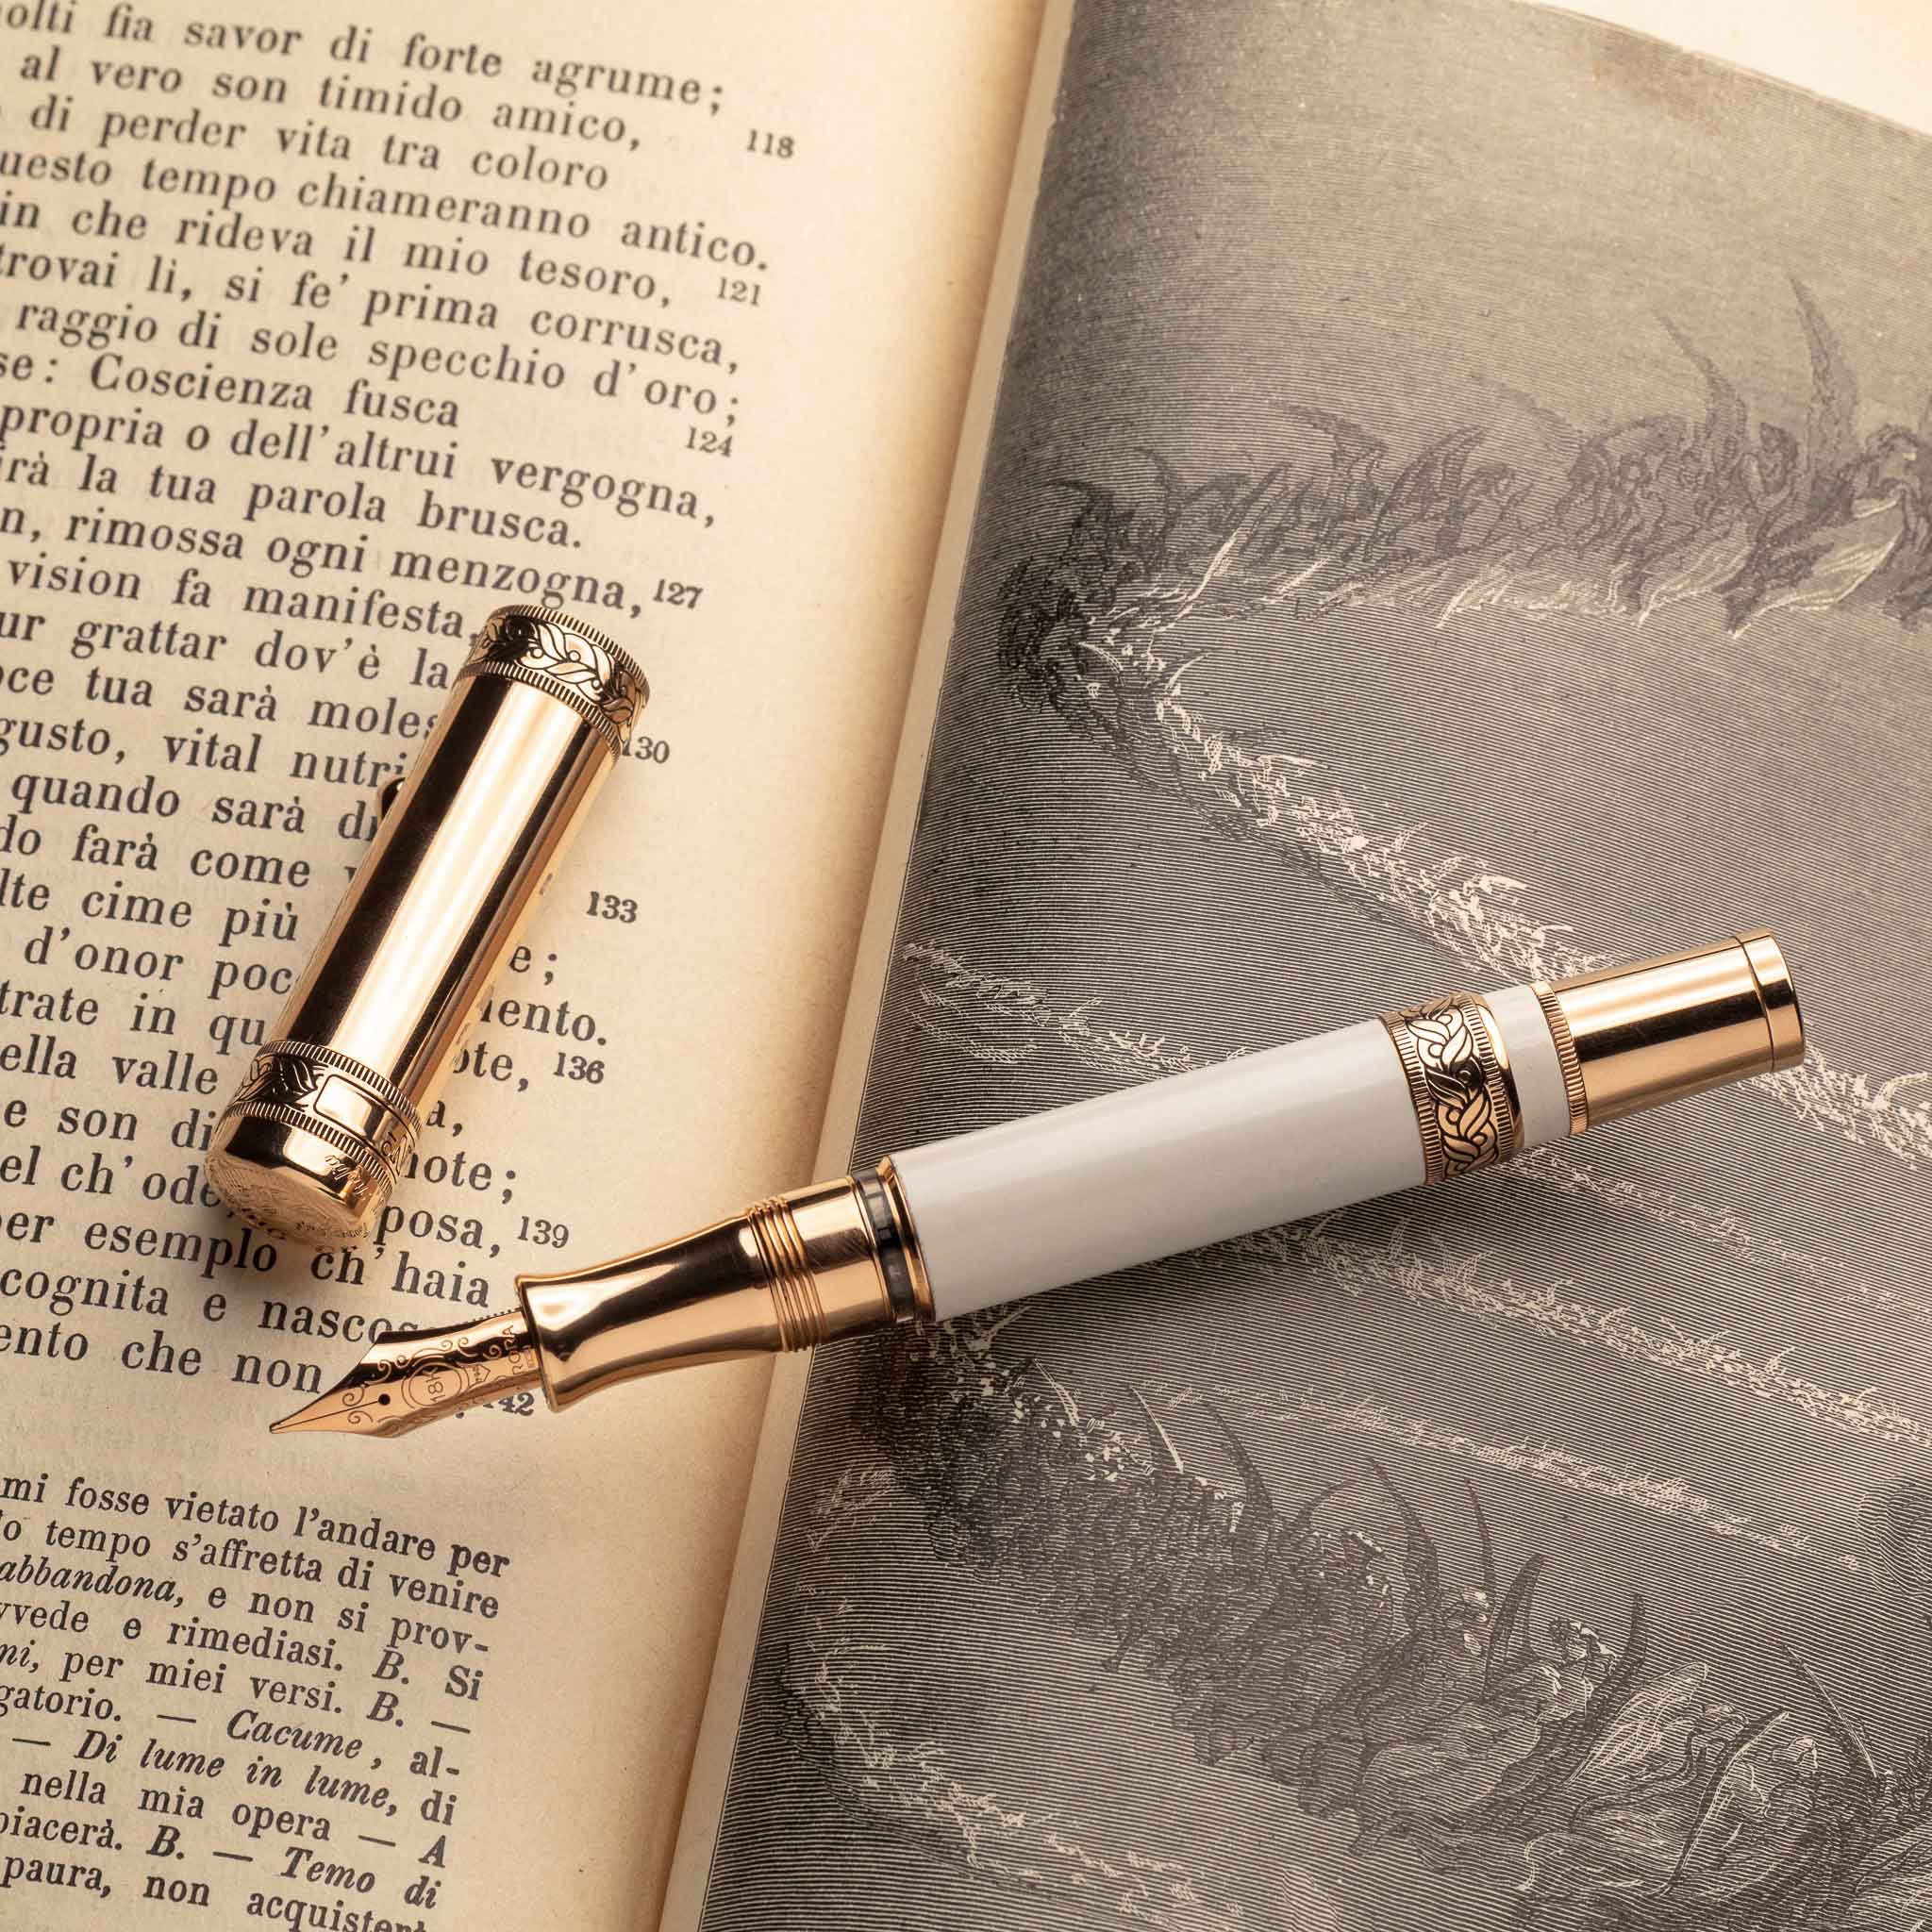 Fountain pen Pen of the Year 2022 Limited Edition, B